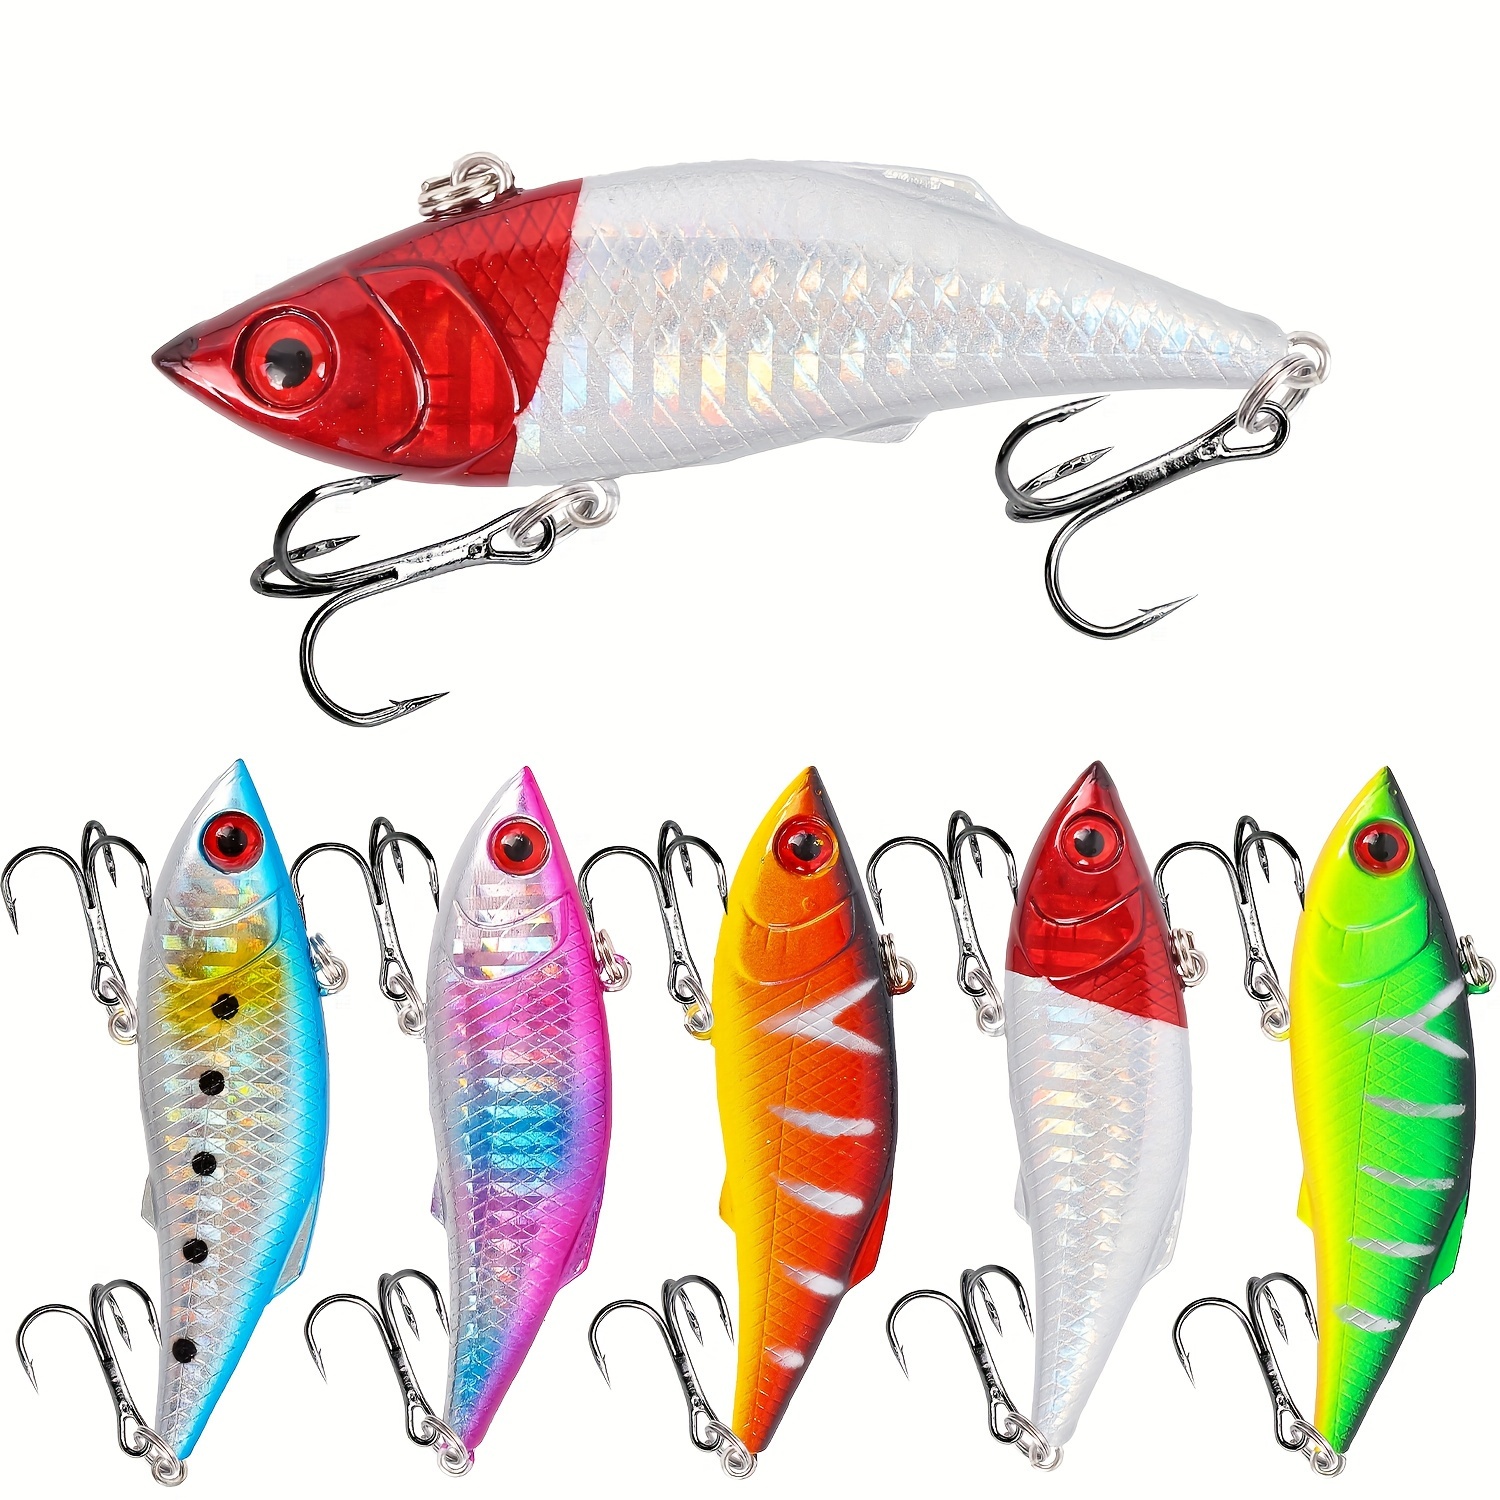 VGEBY 5Pcs Turtle Fishing Baits, Artificial Soft Silicone Spoon Lures  Sequins Hook Accessory with Tackle Box